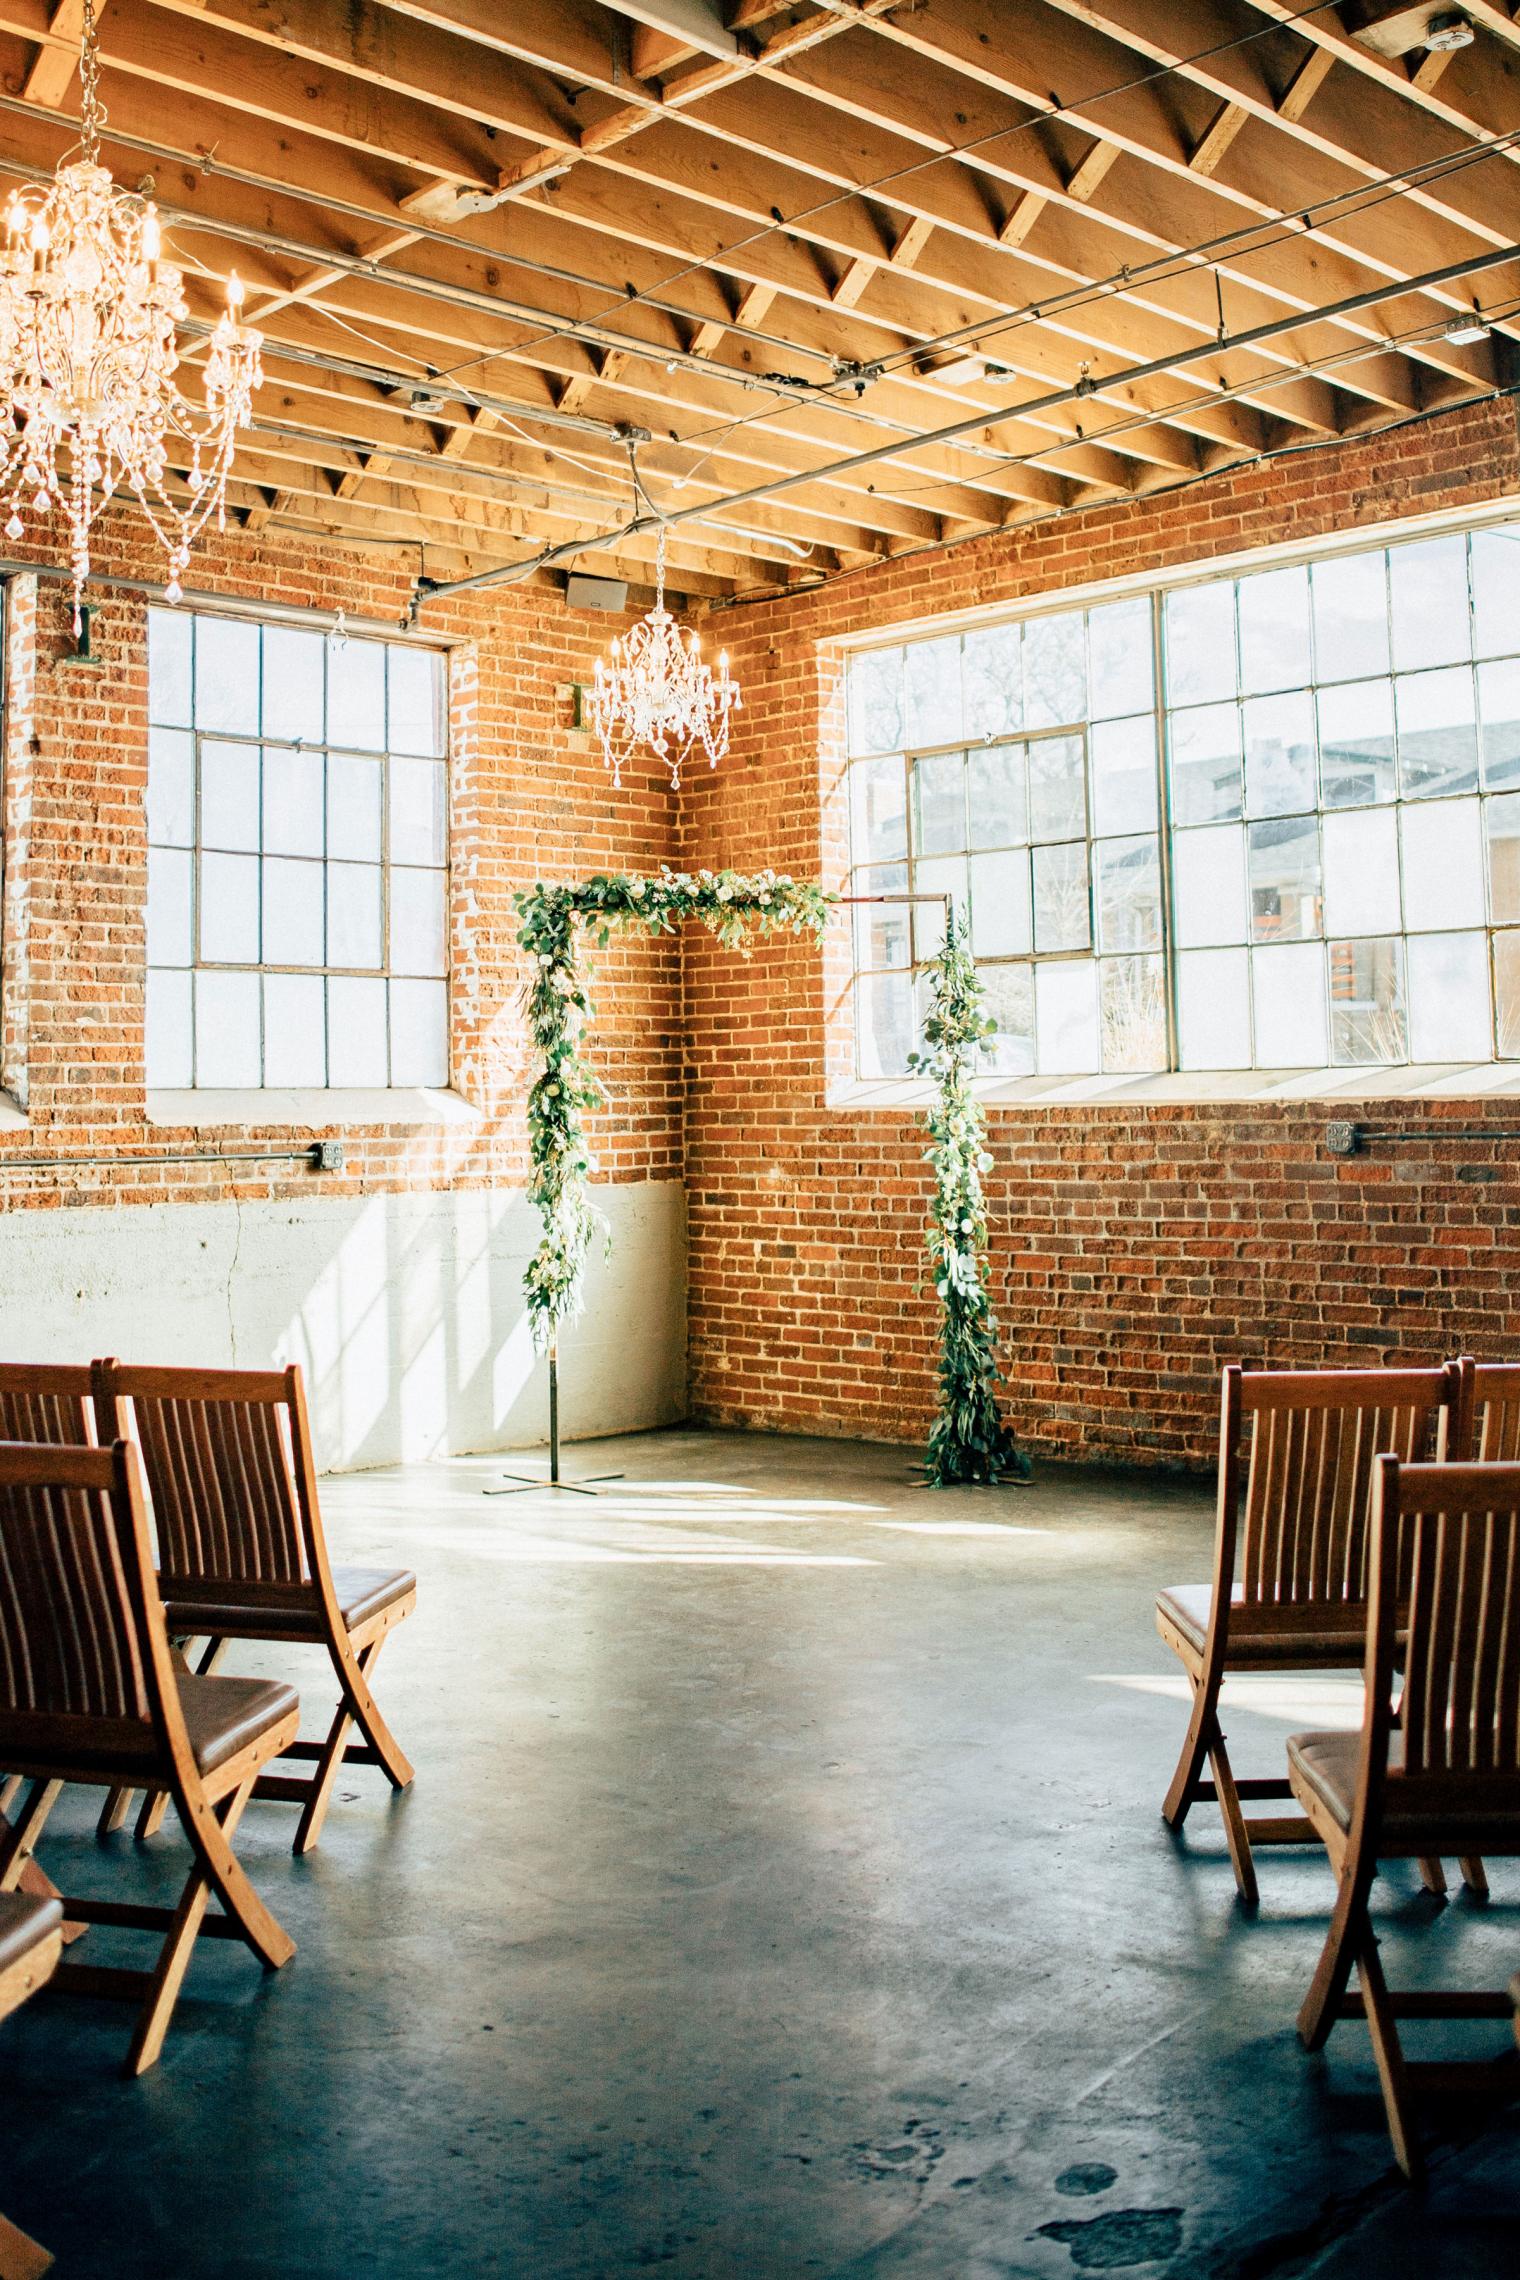 39 Of The Coolest Warehouse Venues Around The World